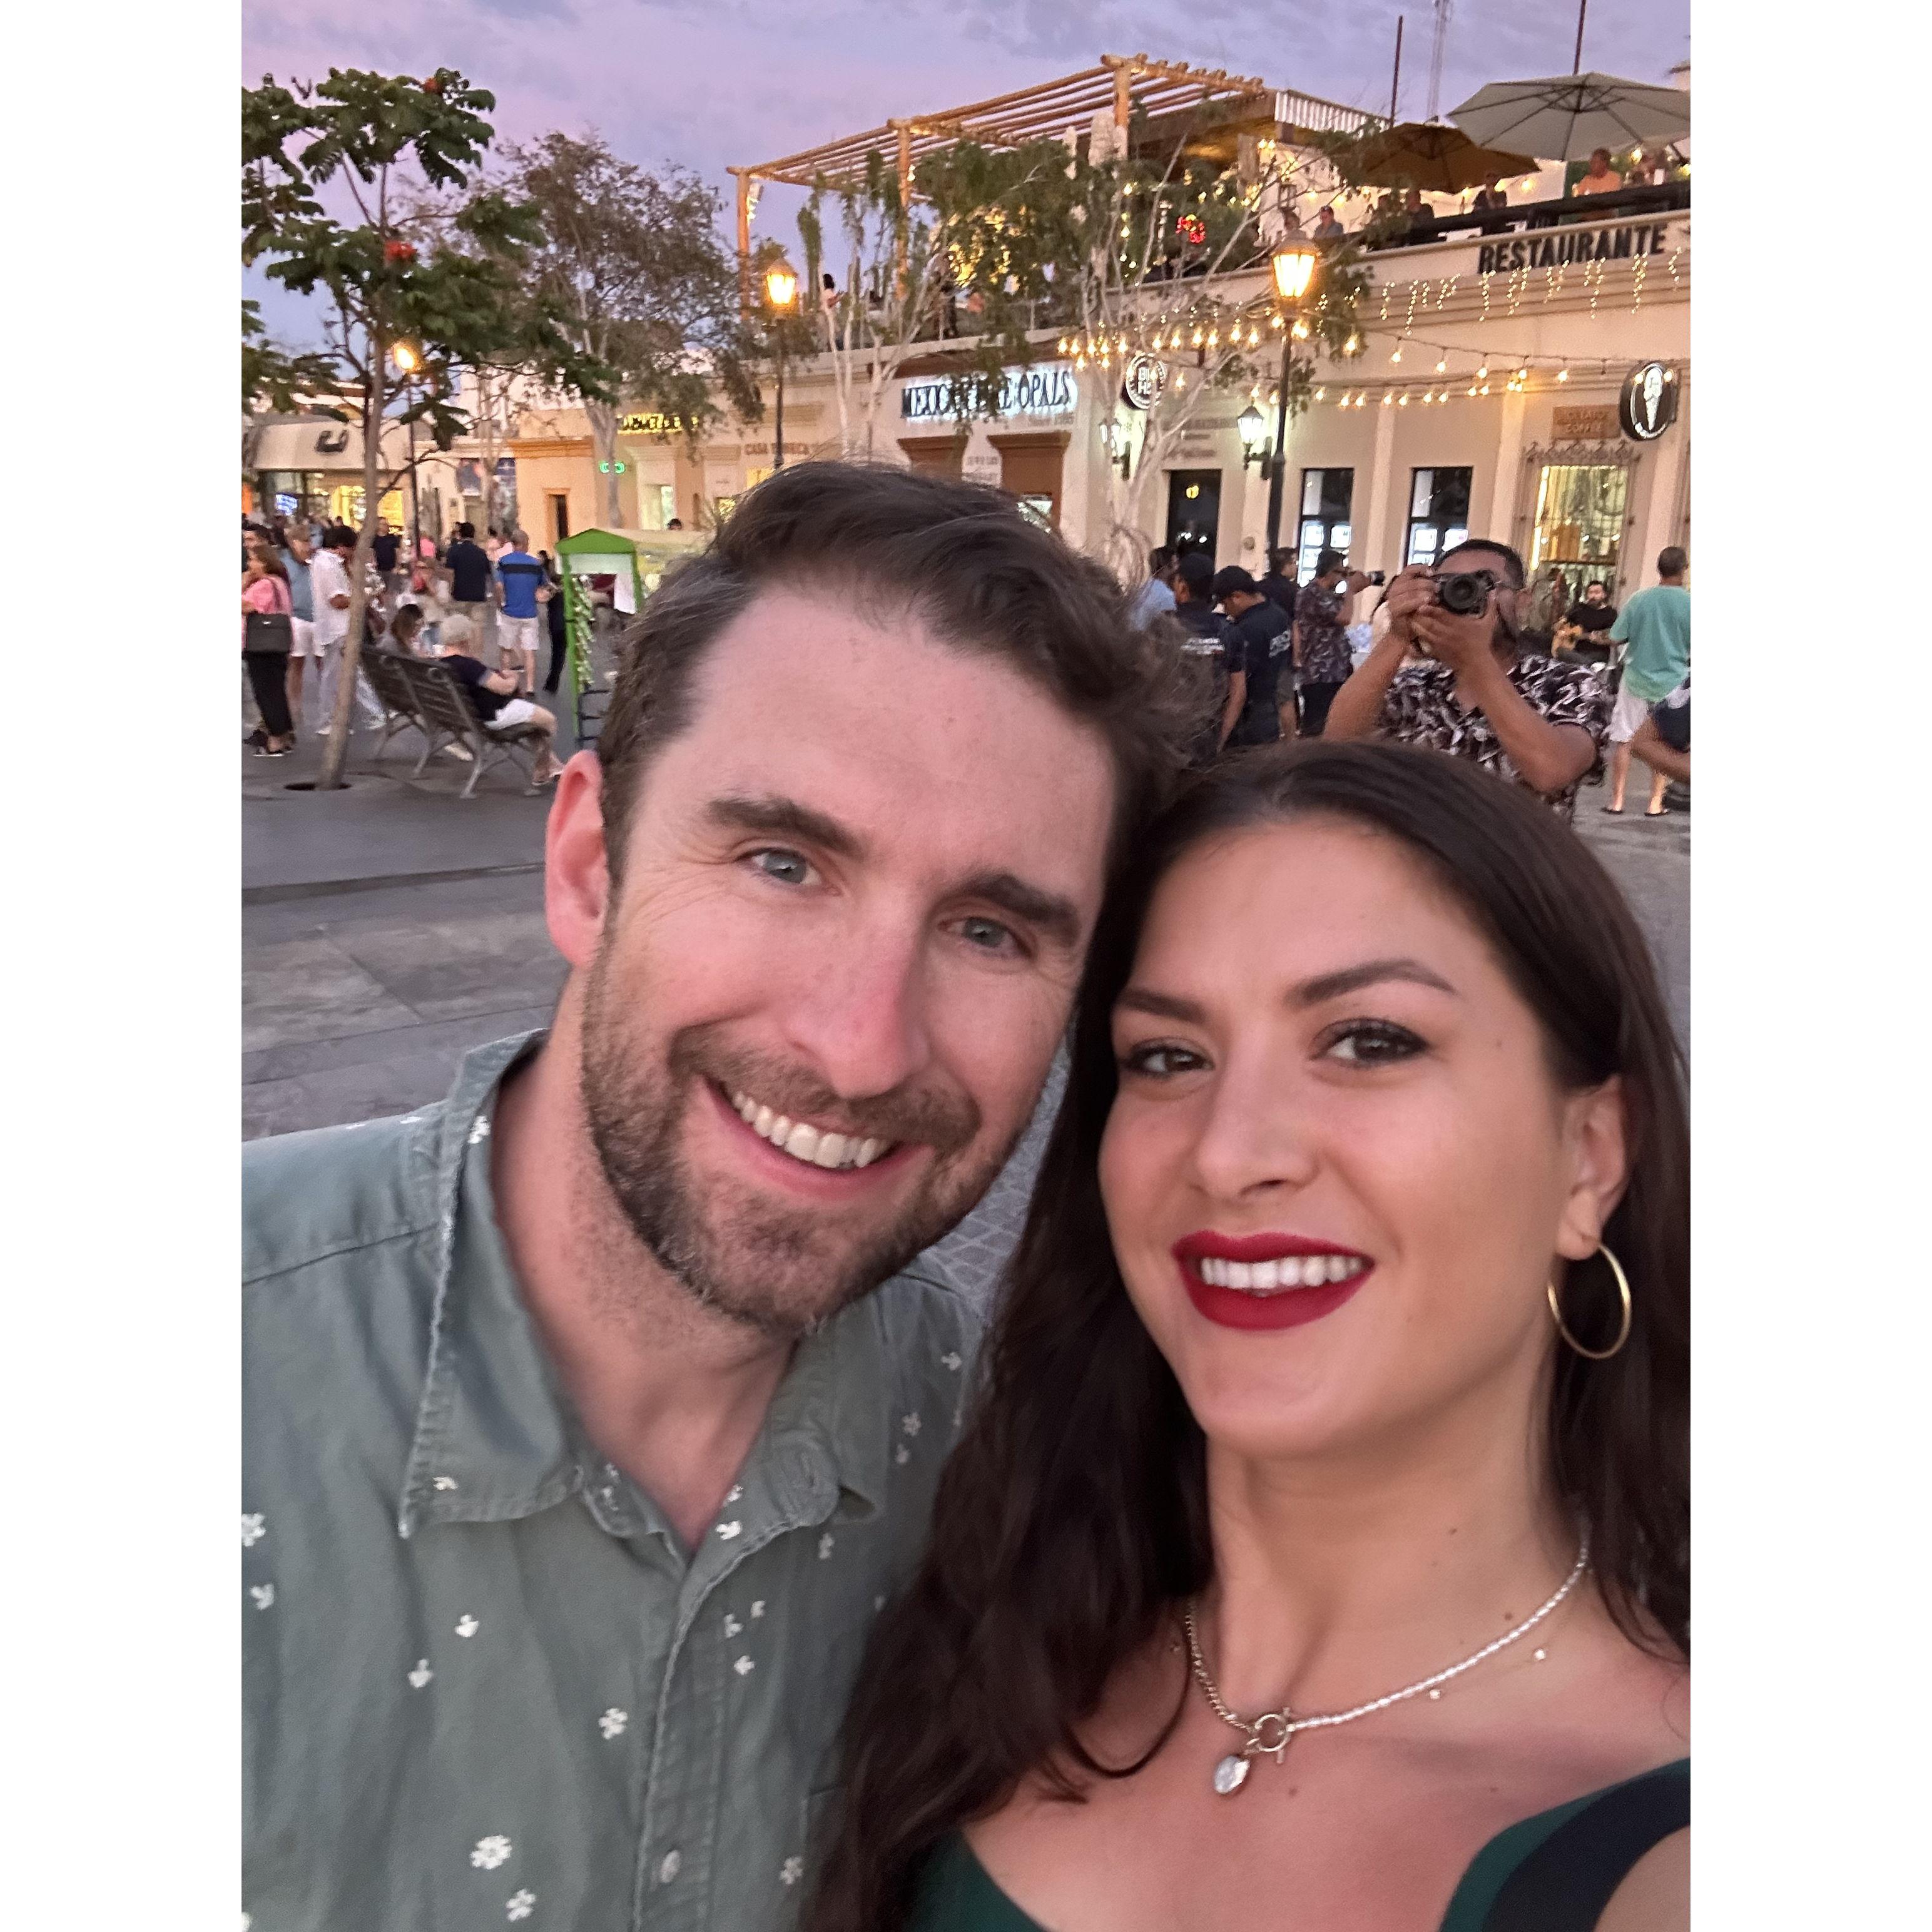 May 2023: Our most recent trip to Cabo, exploring the Art Walk!